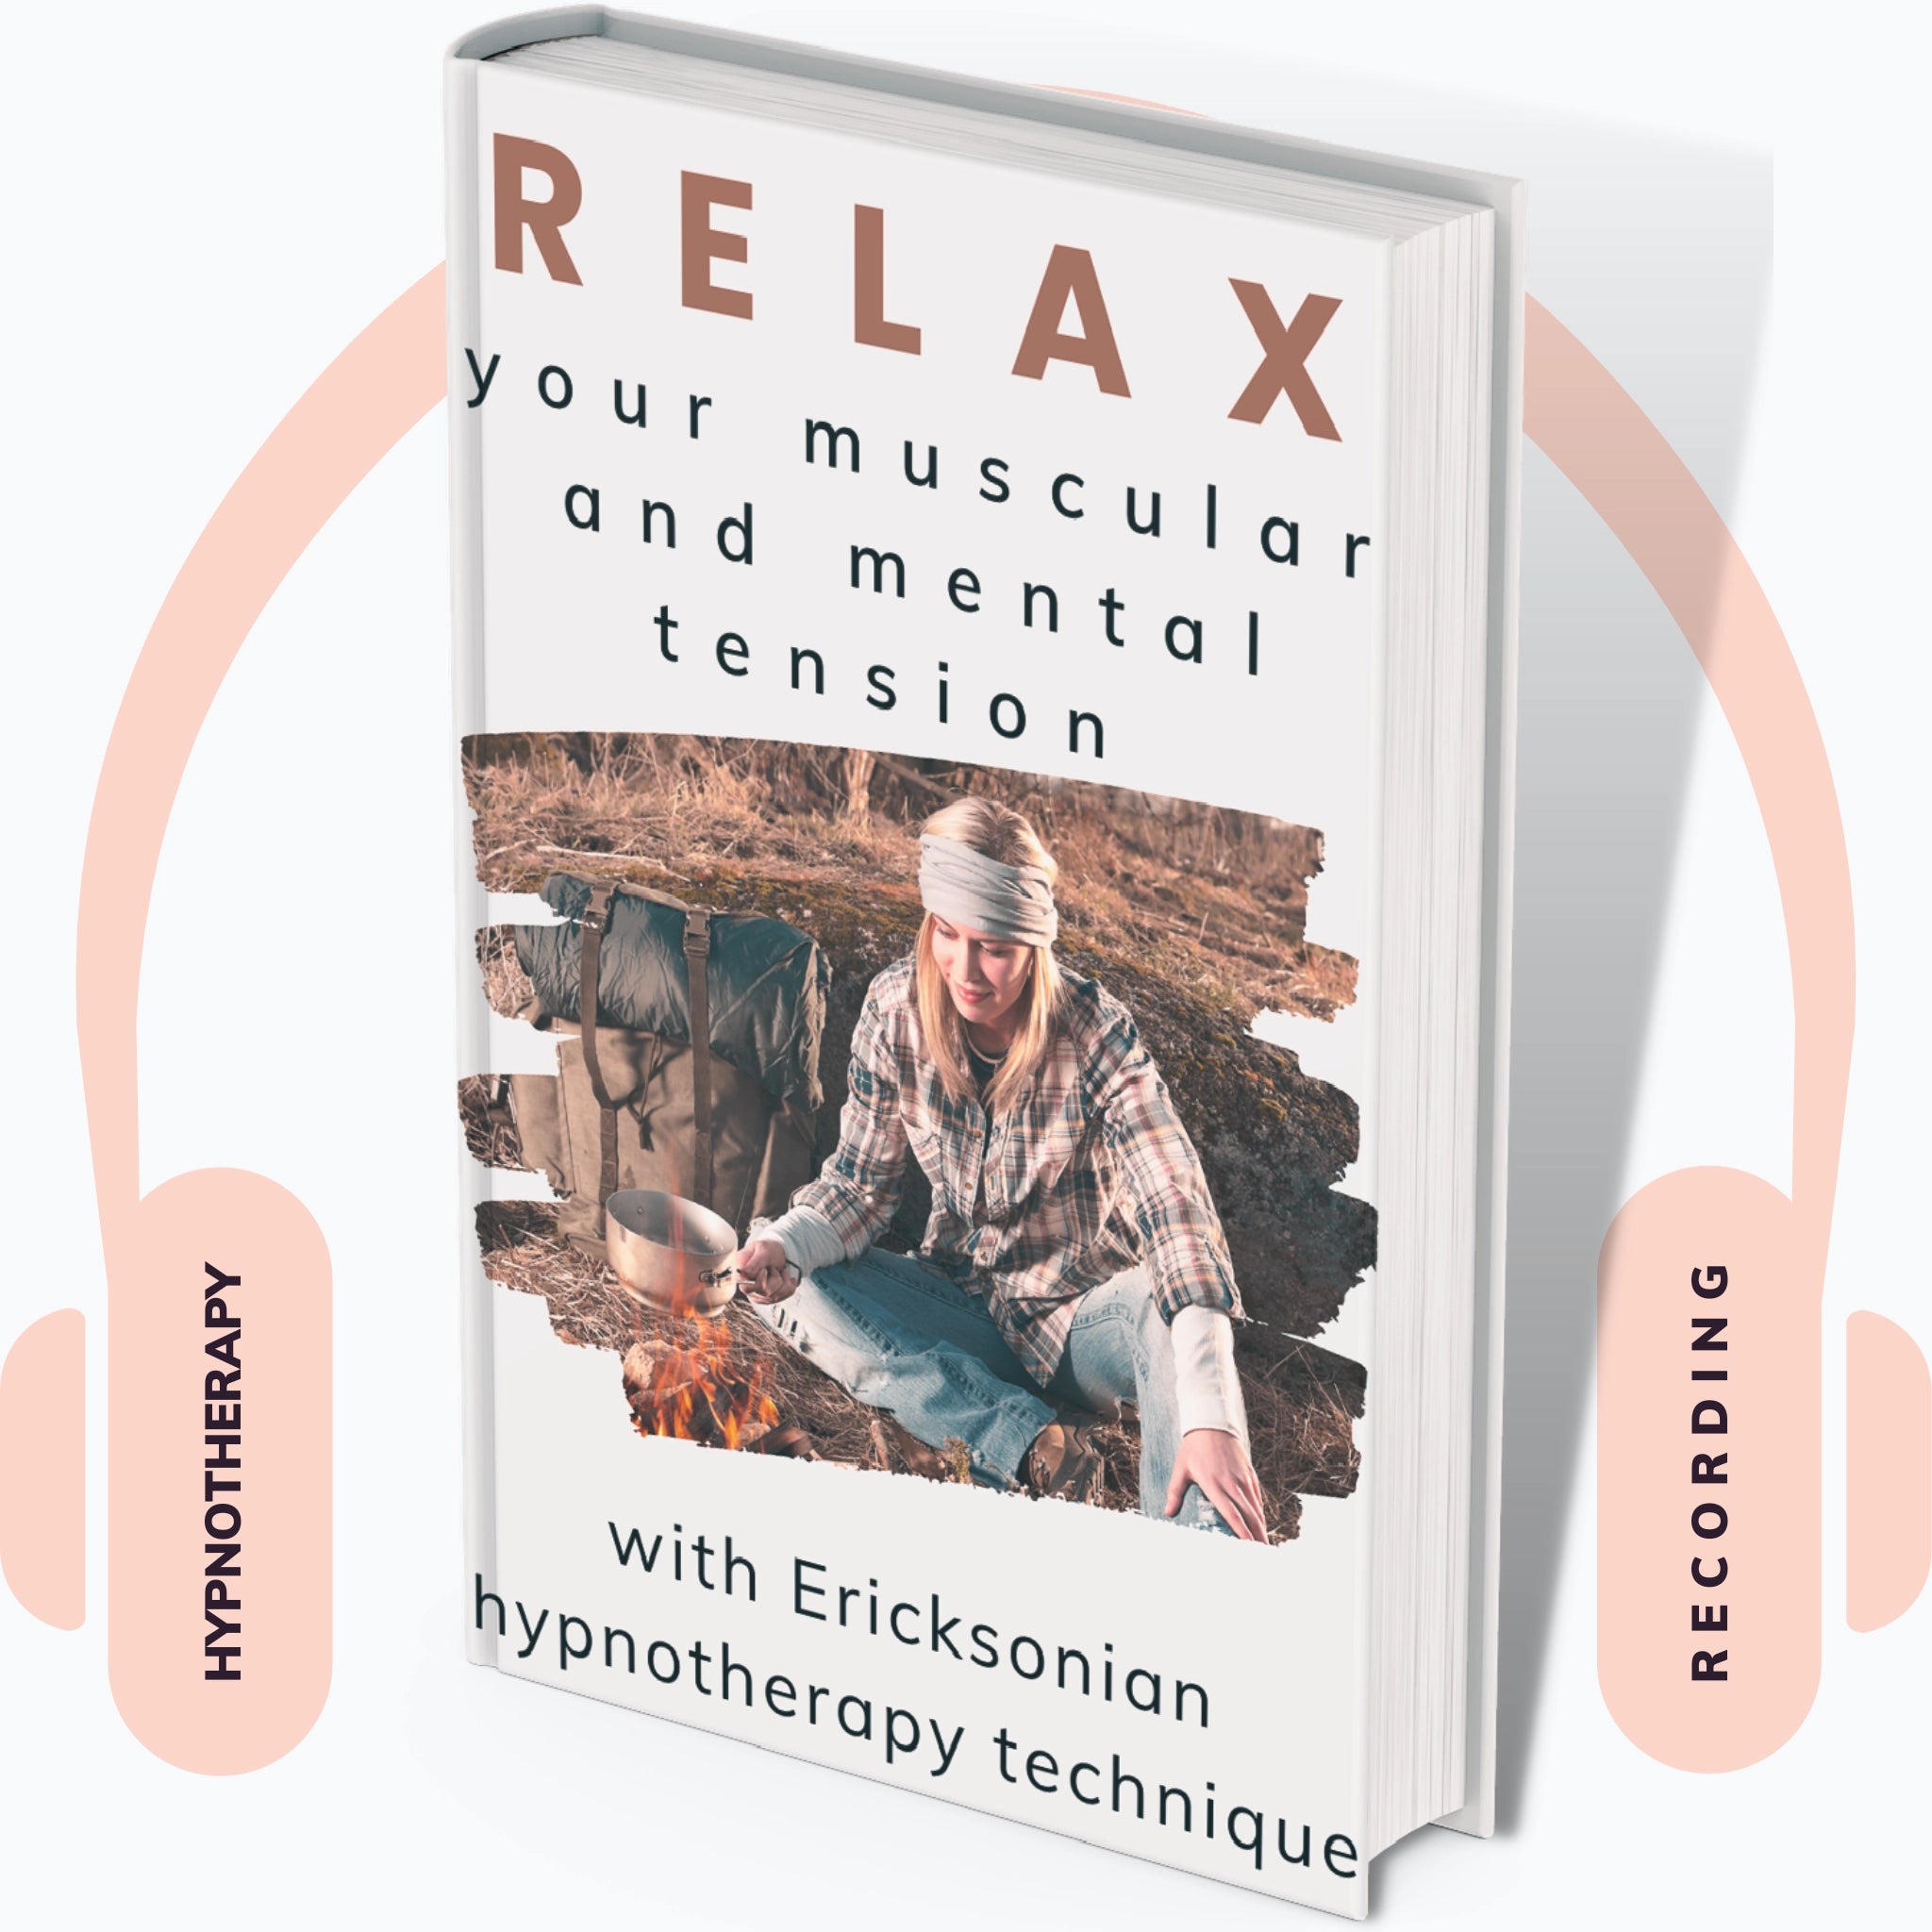 Audiobook cover: Relax your muscular and mental tension with Ericksonian Hypnotherapy technique